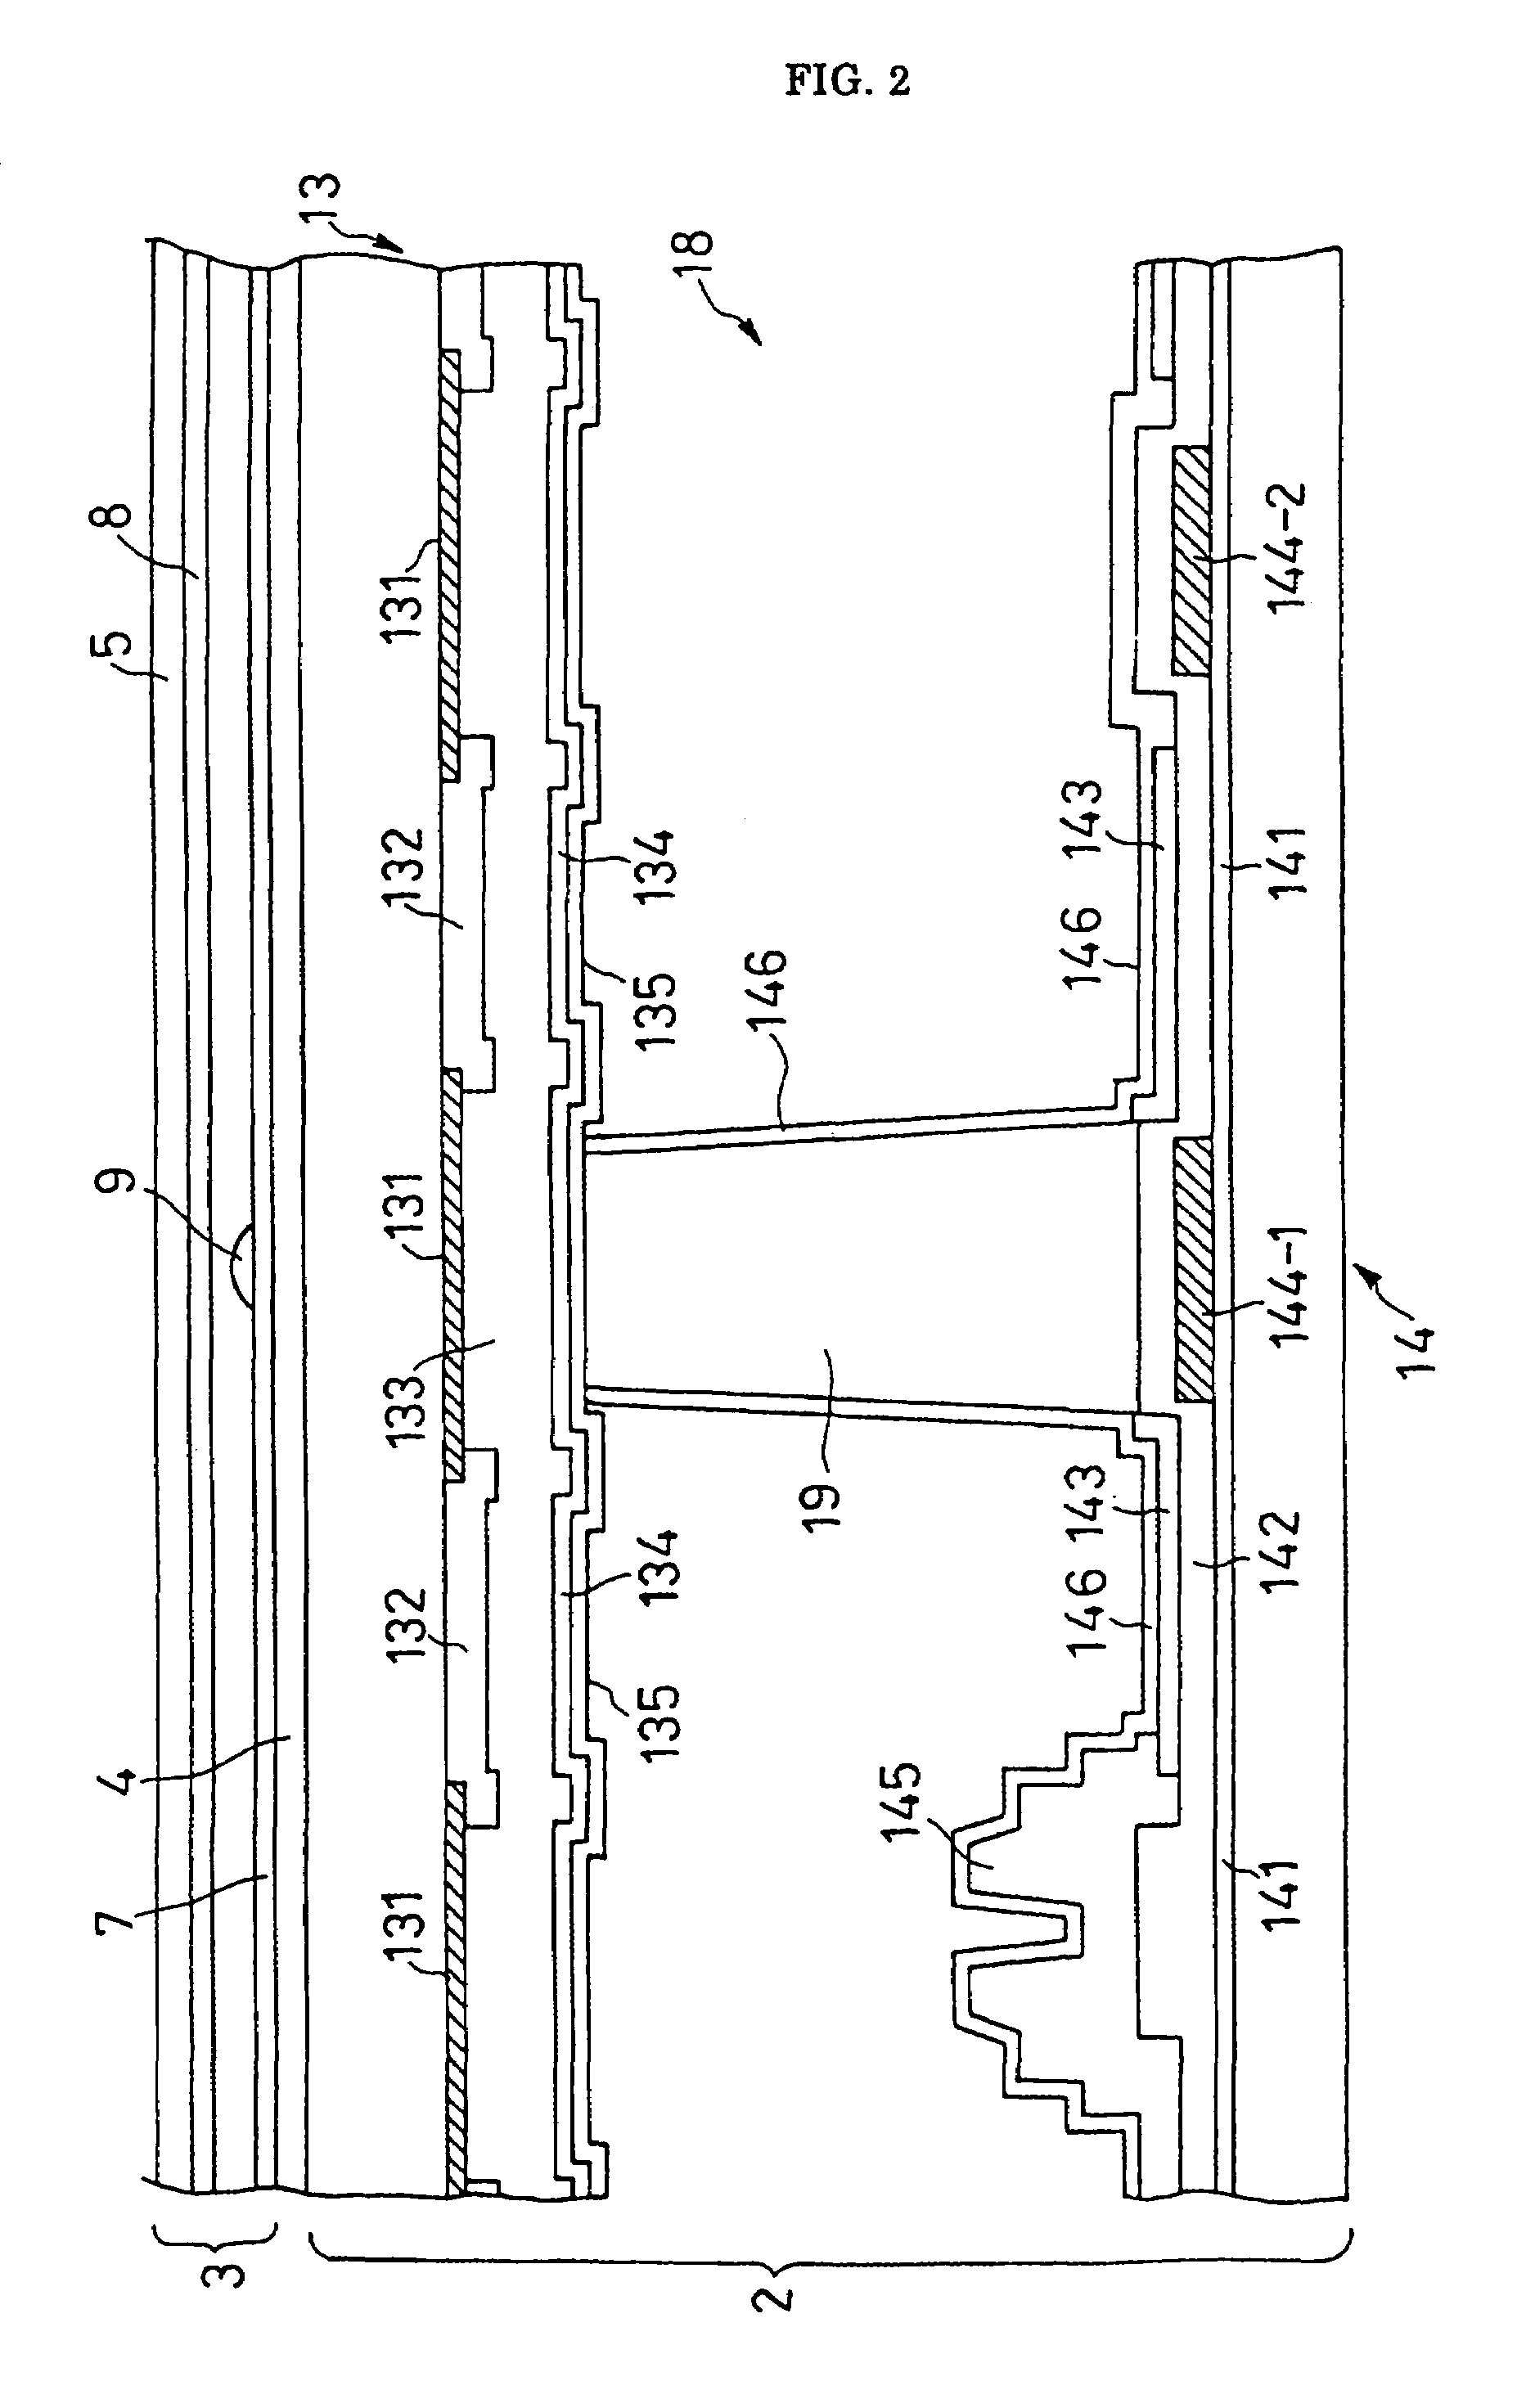 Touch sensor type liquid crystal display having a plurality of spacers, each comprising two members adapted to slide relative to each other in response to a contact force